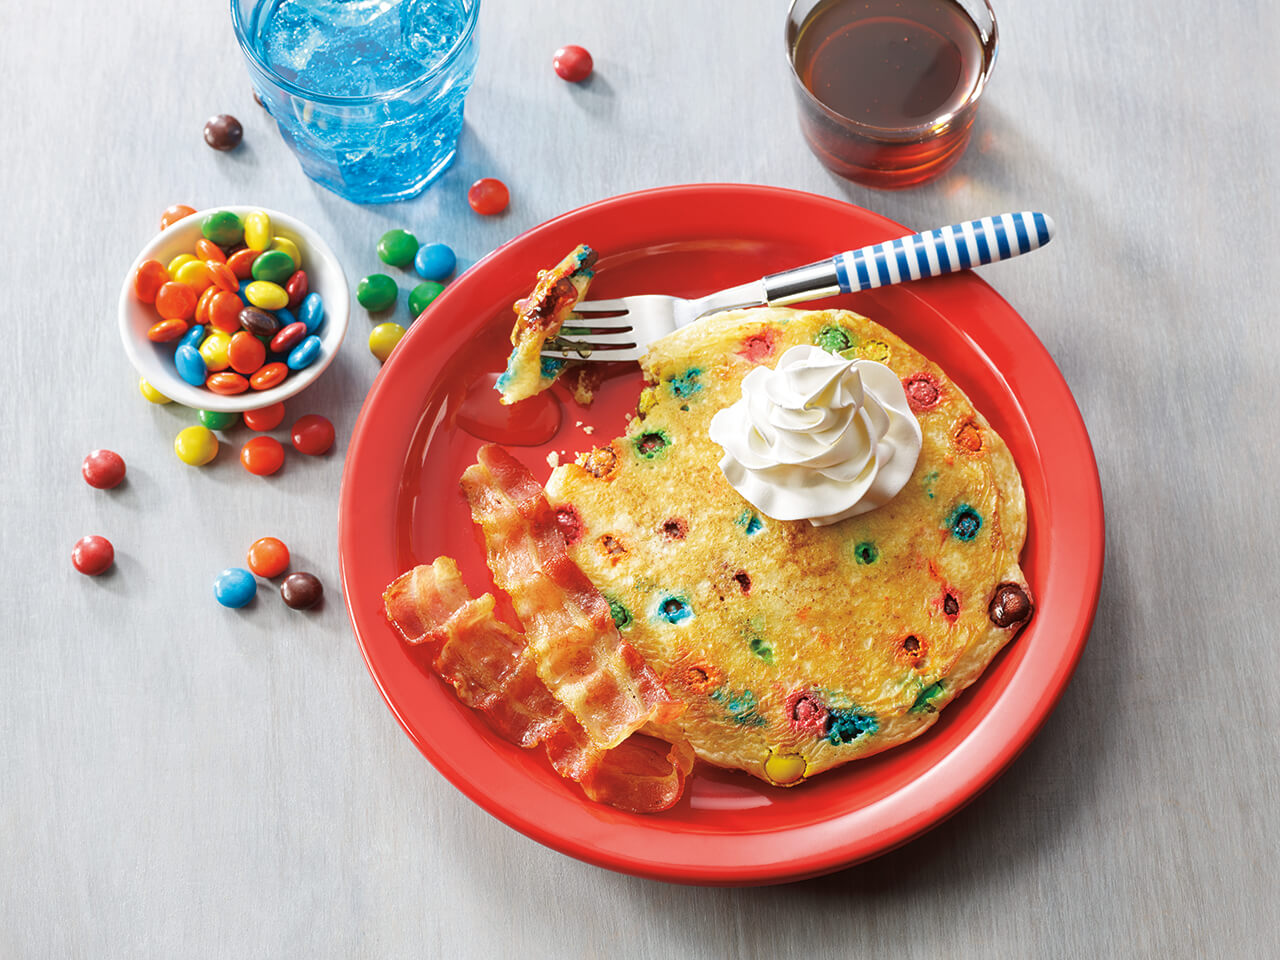 Tie-Dyed Pancake with M&M’s